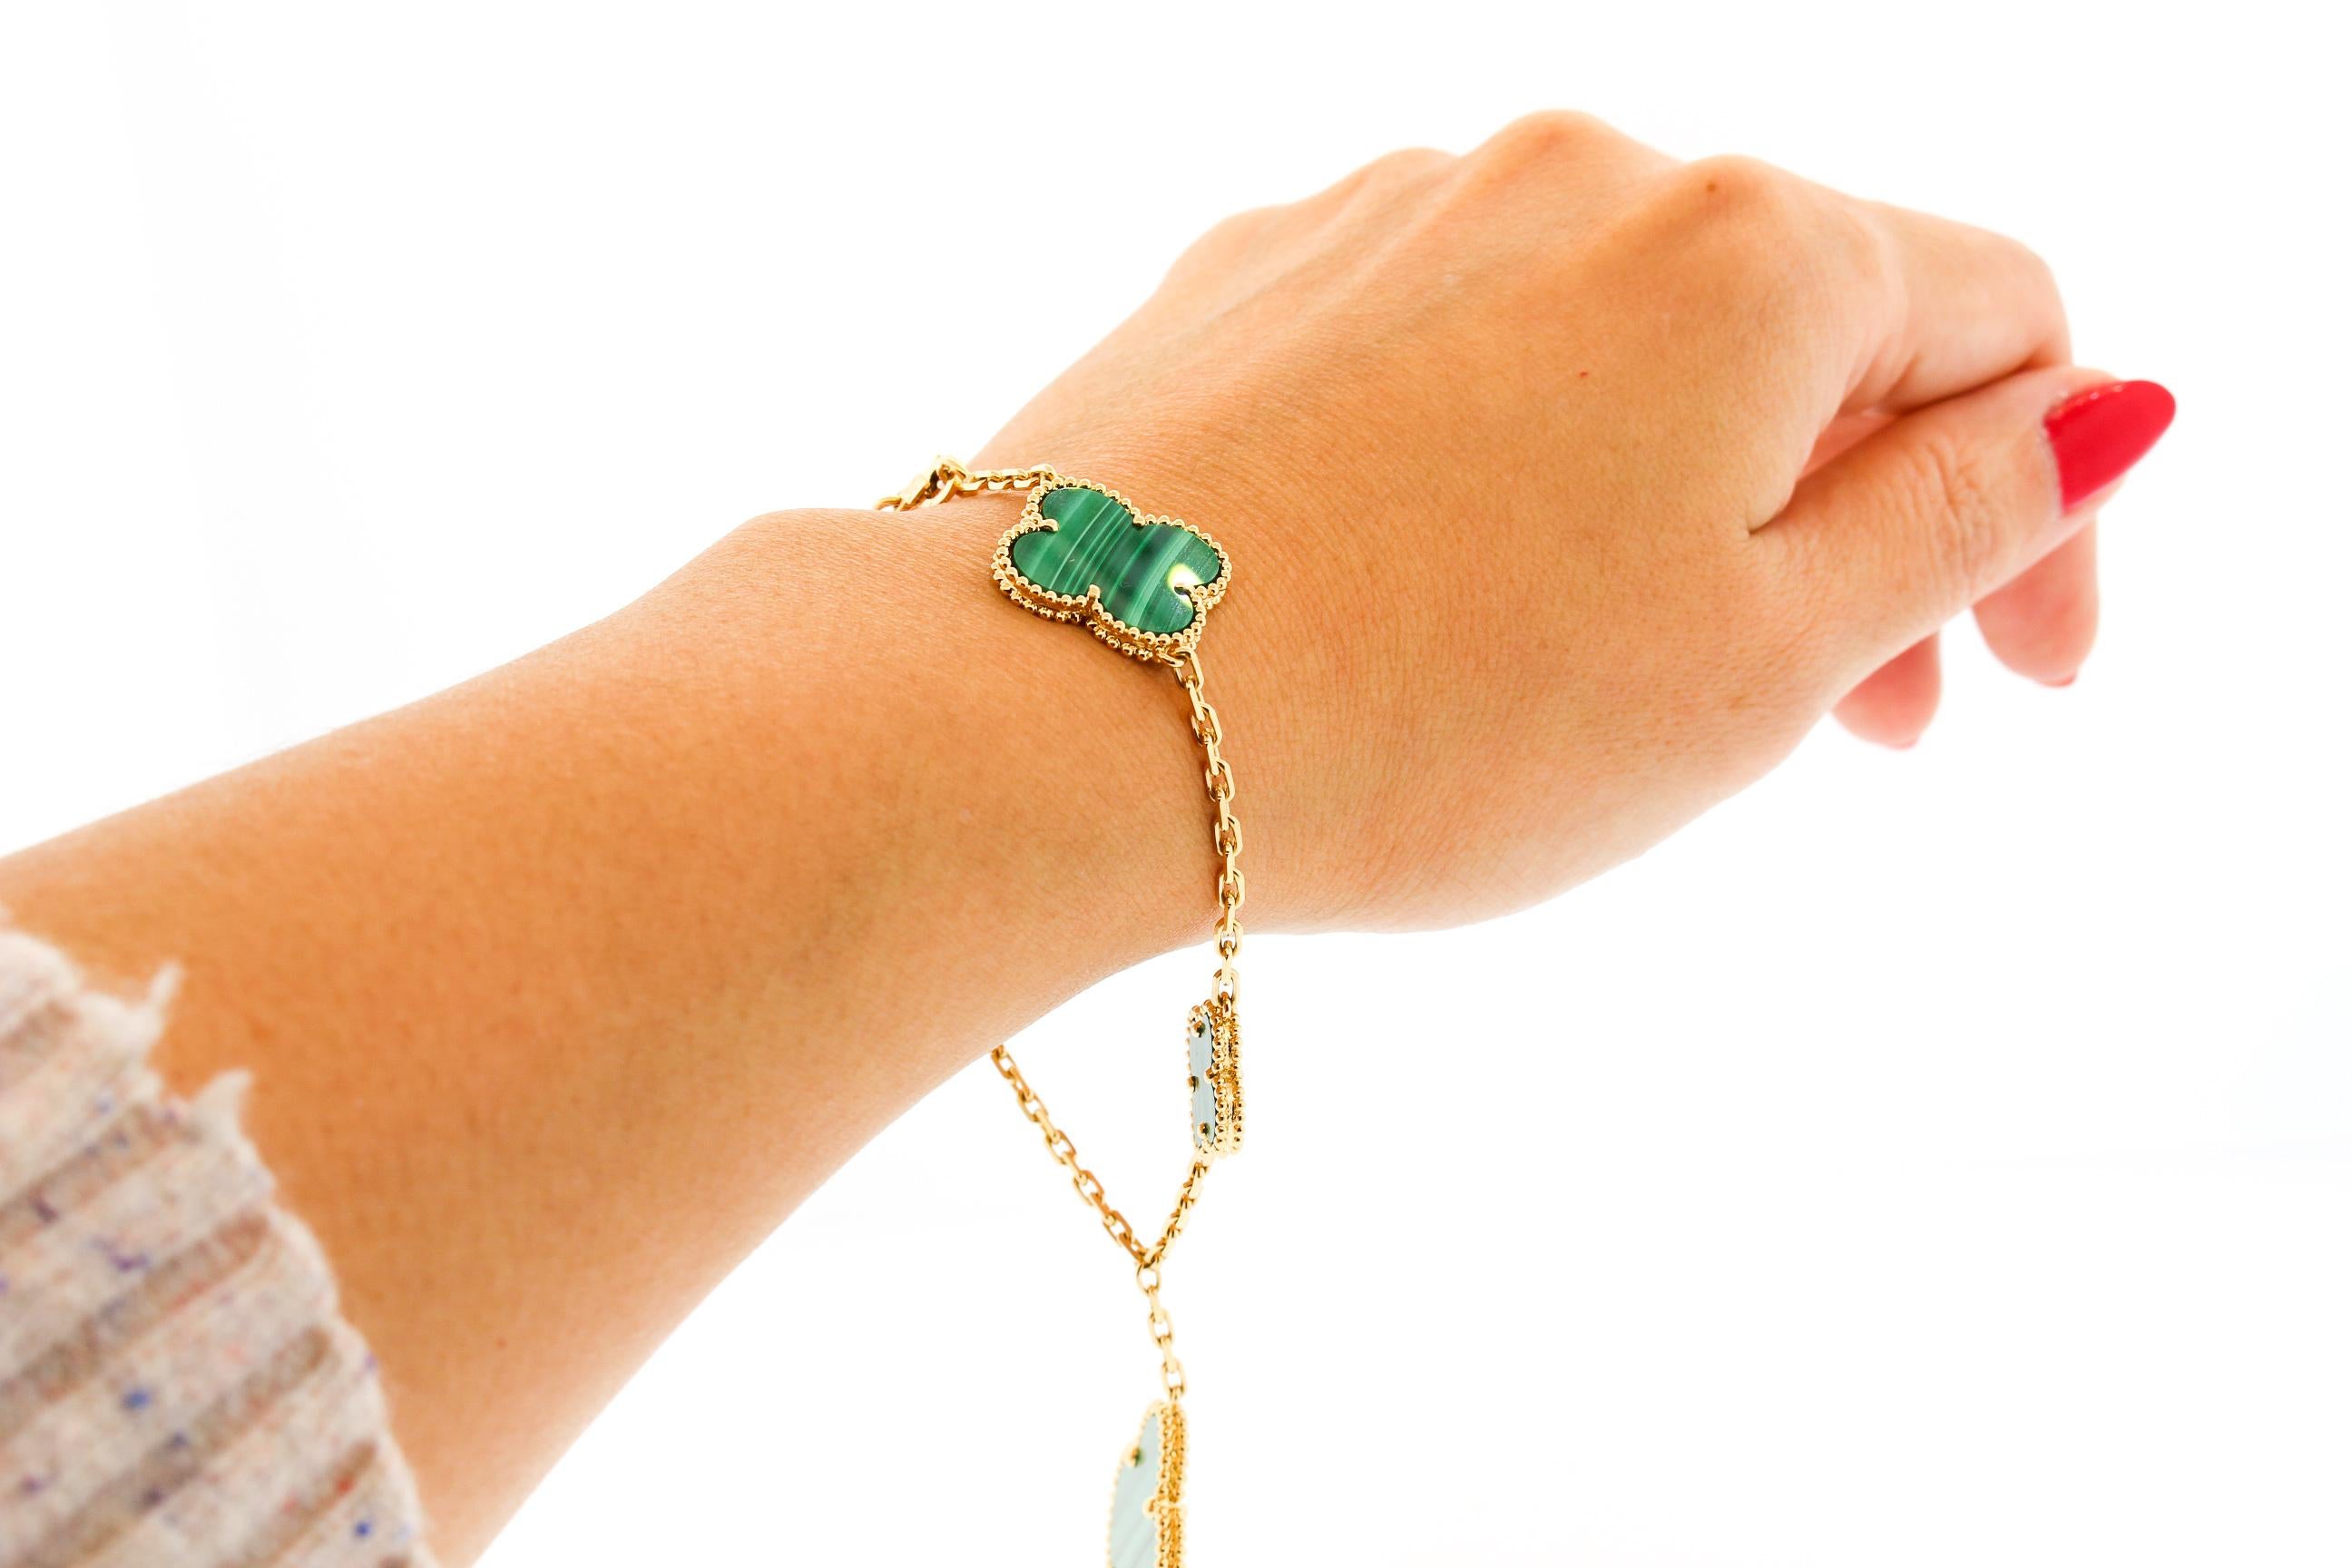 Colorful Malachite Magic Alhambra 5 Motif bracelet by Van Cleef & Arpels. With varying sizes and Alhambra flowers hanging off like charms, this bracelet is fun and whimsical. The green is an eye catching color. The bracelet is 7.5 inches long. It is